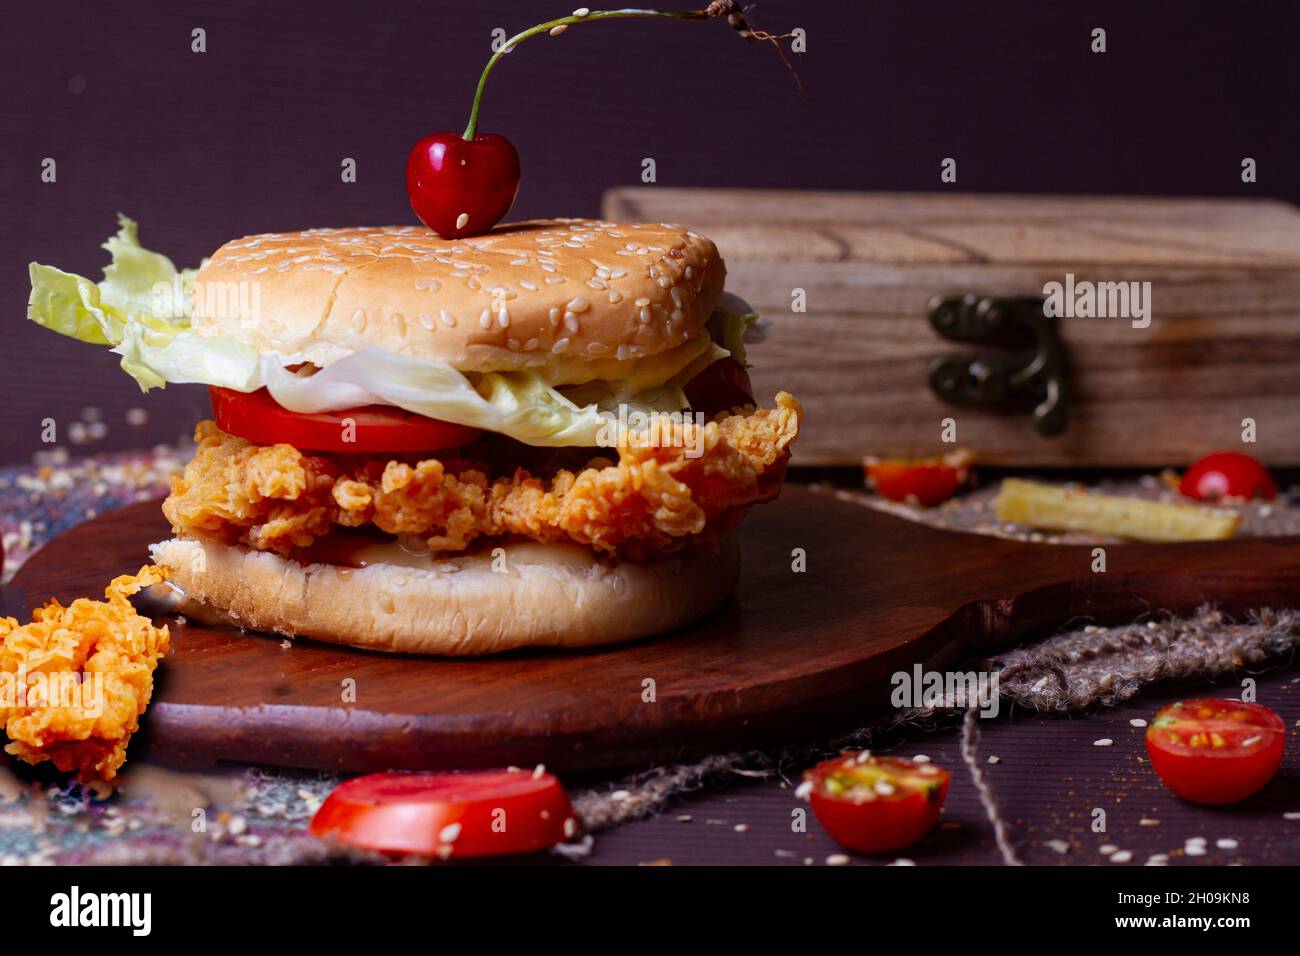 Juicy fish burger, hamburger or cheeseburger with one fish patties, with sauce. Concept of American fast food. Copy space Stock Photo